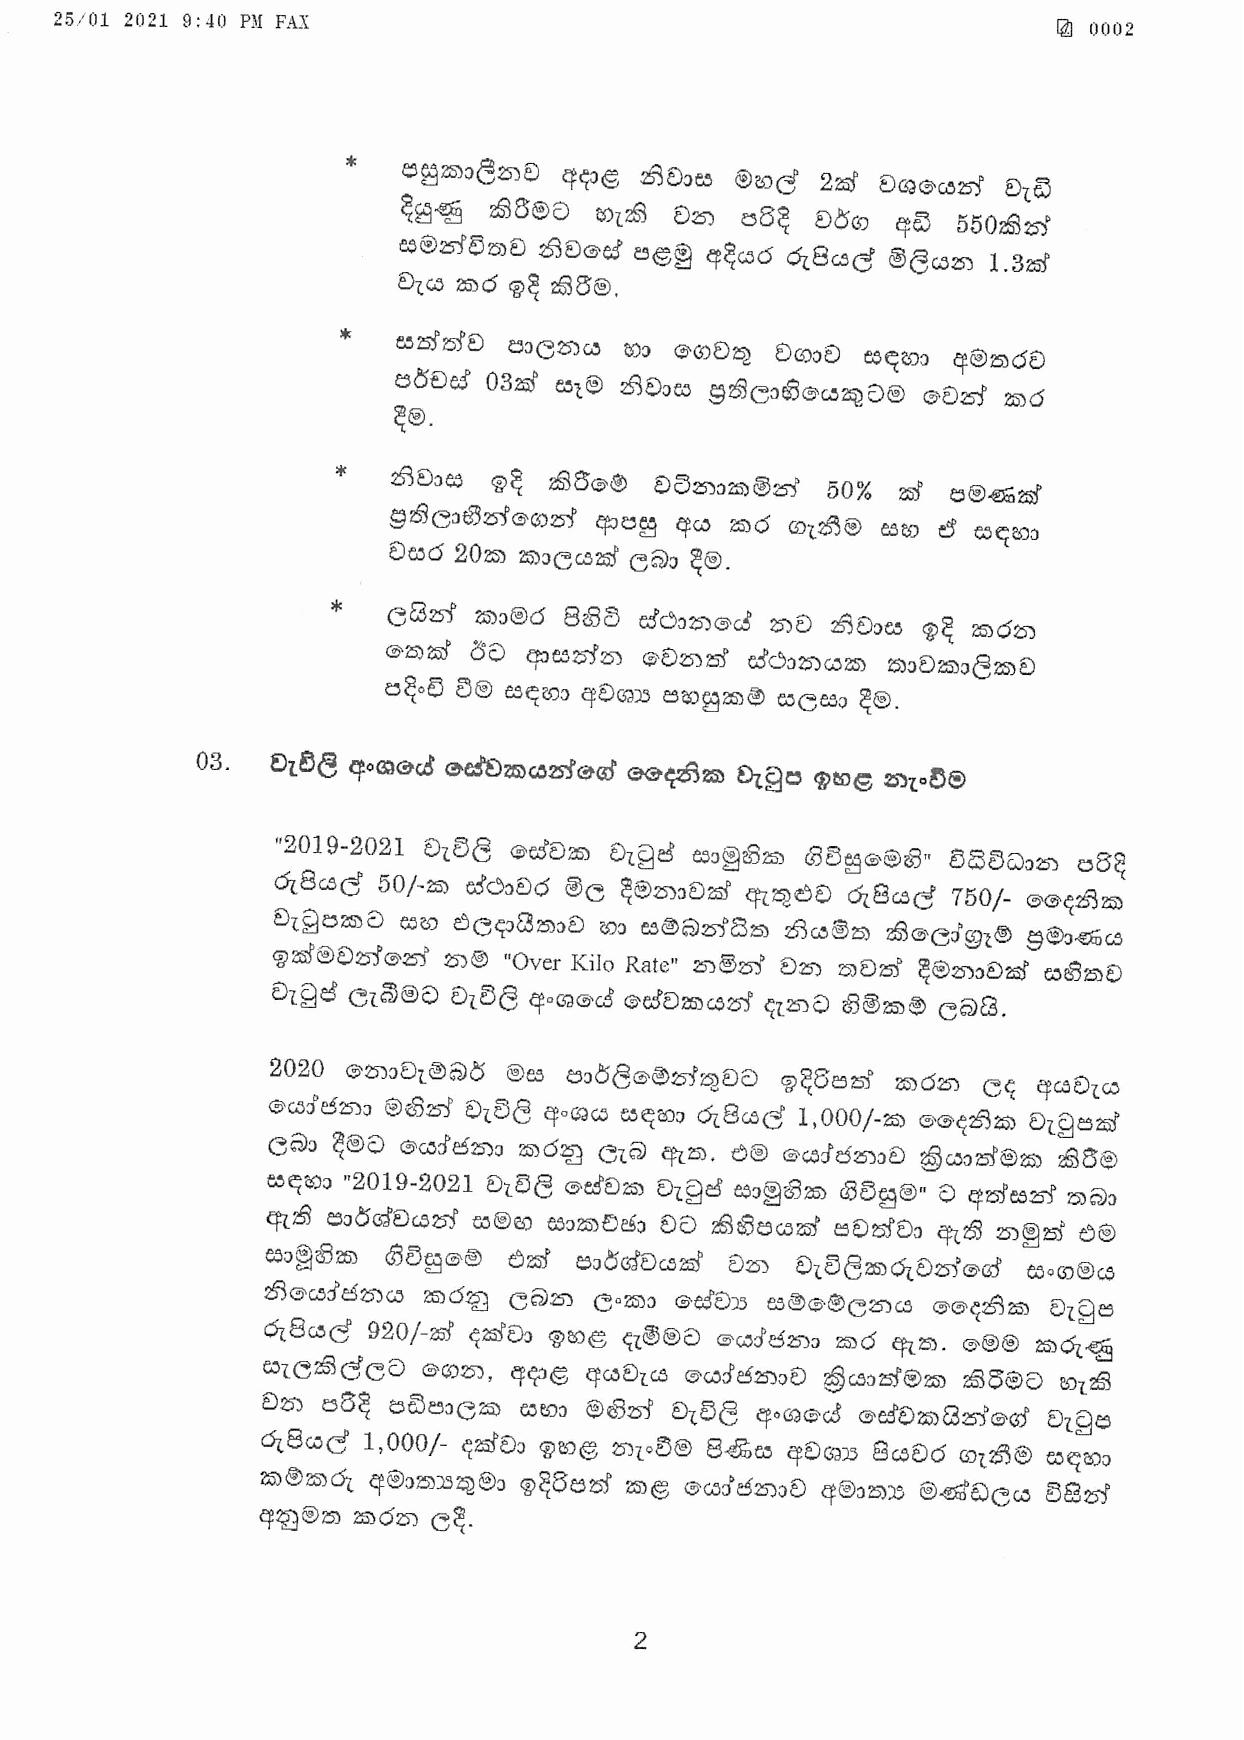 Cabinet Decision on 25.01.2021 page 002